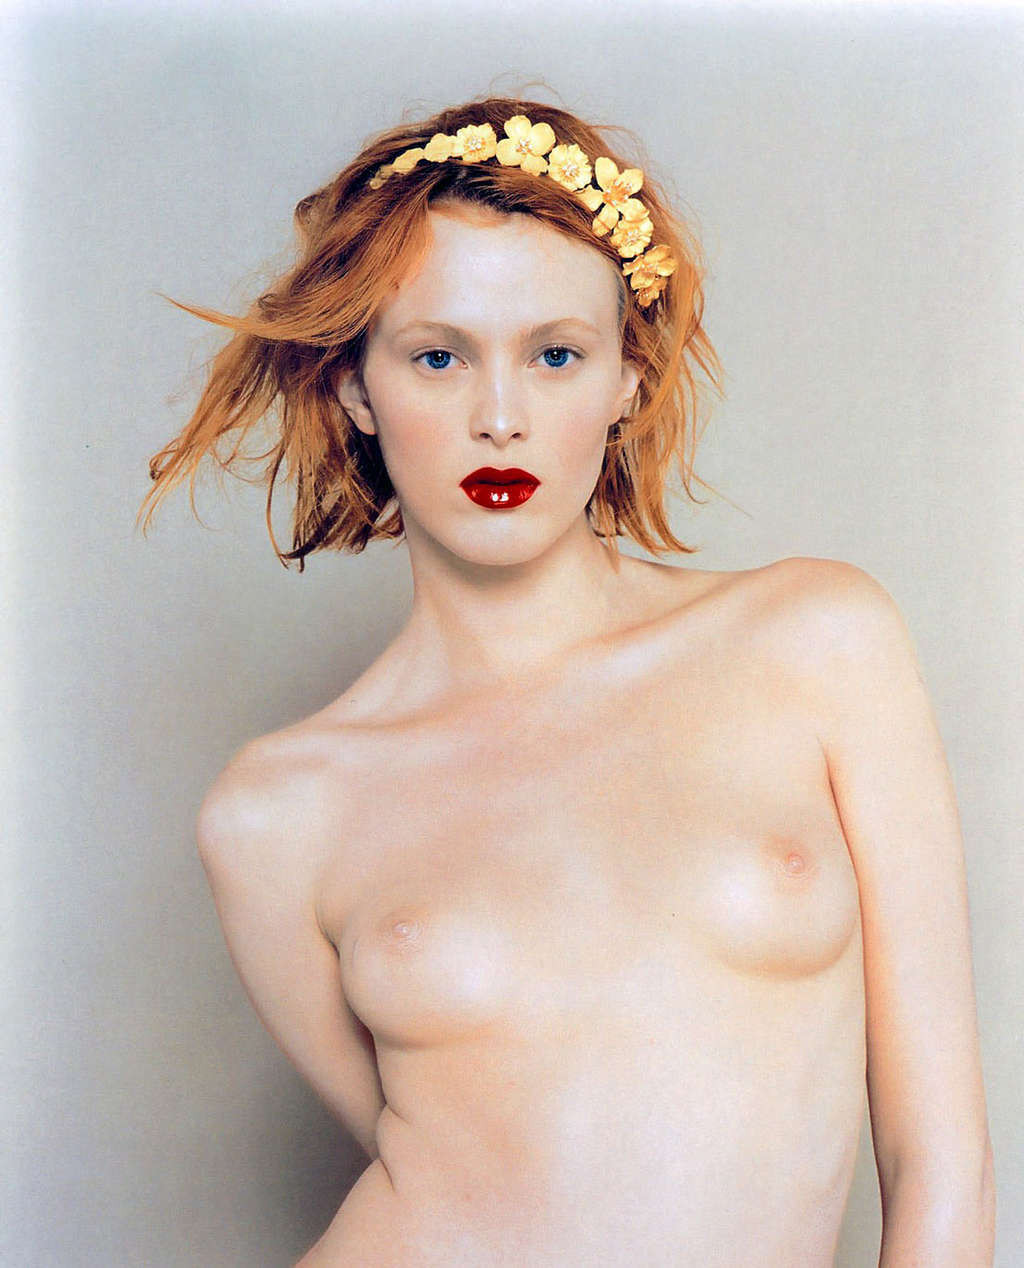 Karen Elson showing her nice tits in some nude photoshoot #75351838